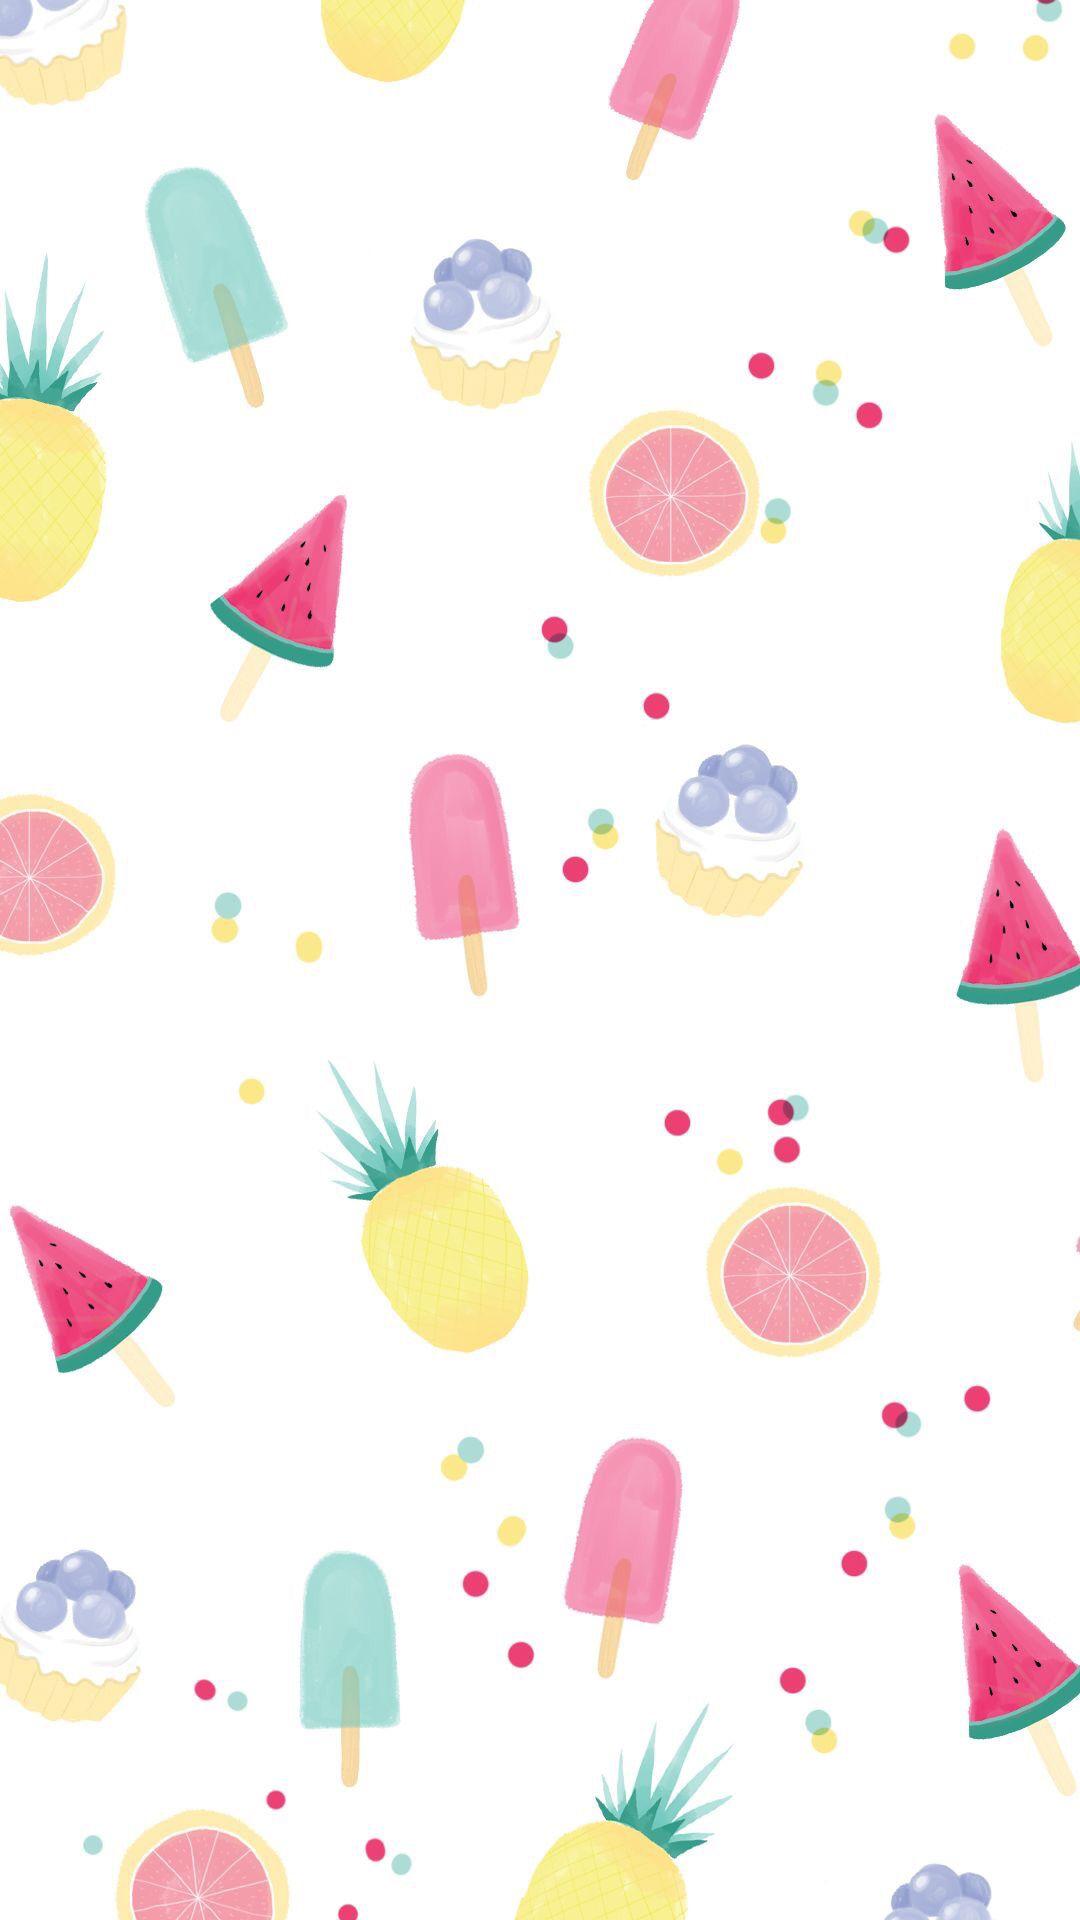 100 Summer iPhone Wallpapers that you have to see  Artist Hue